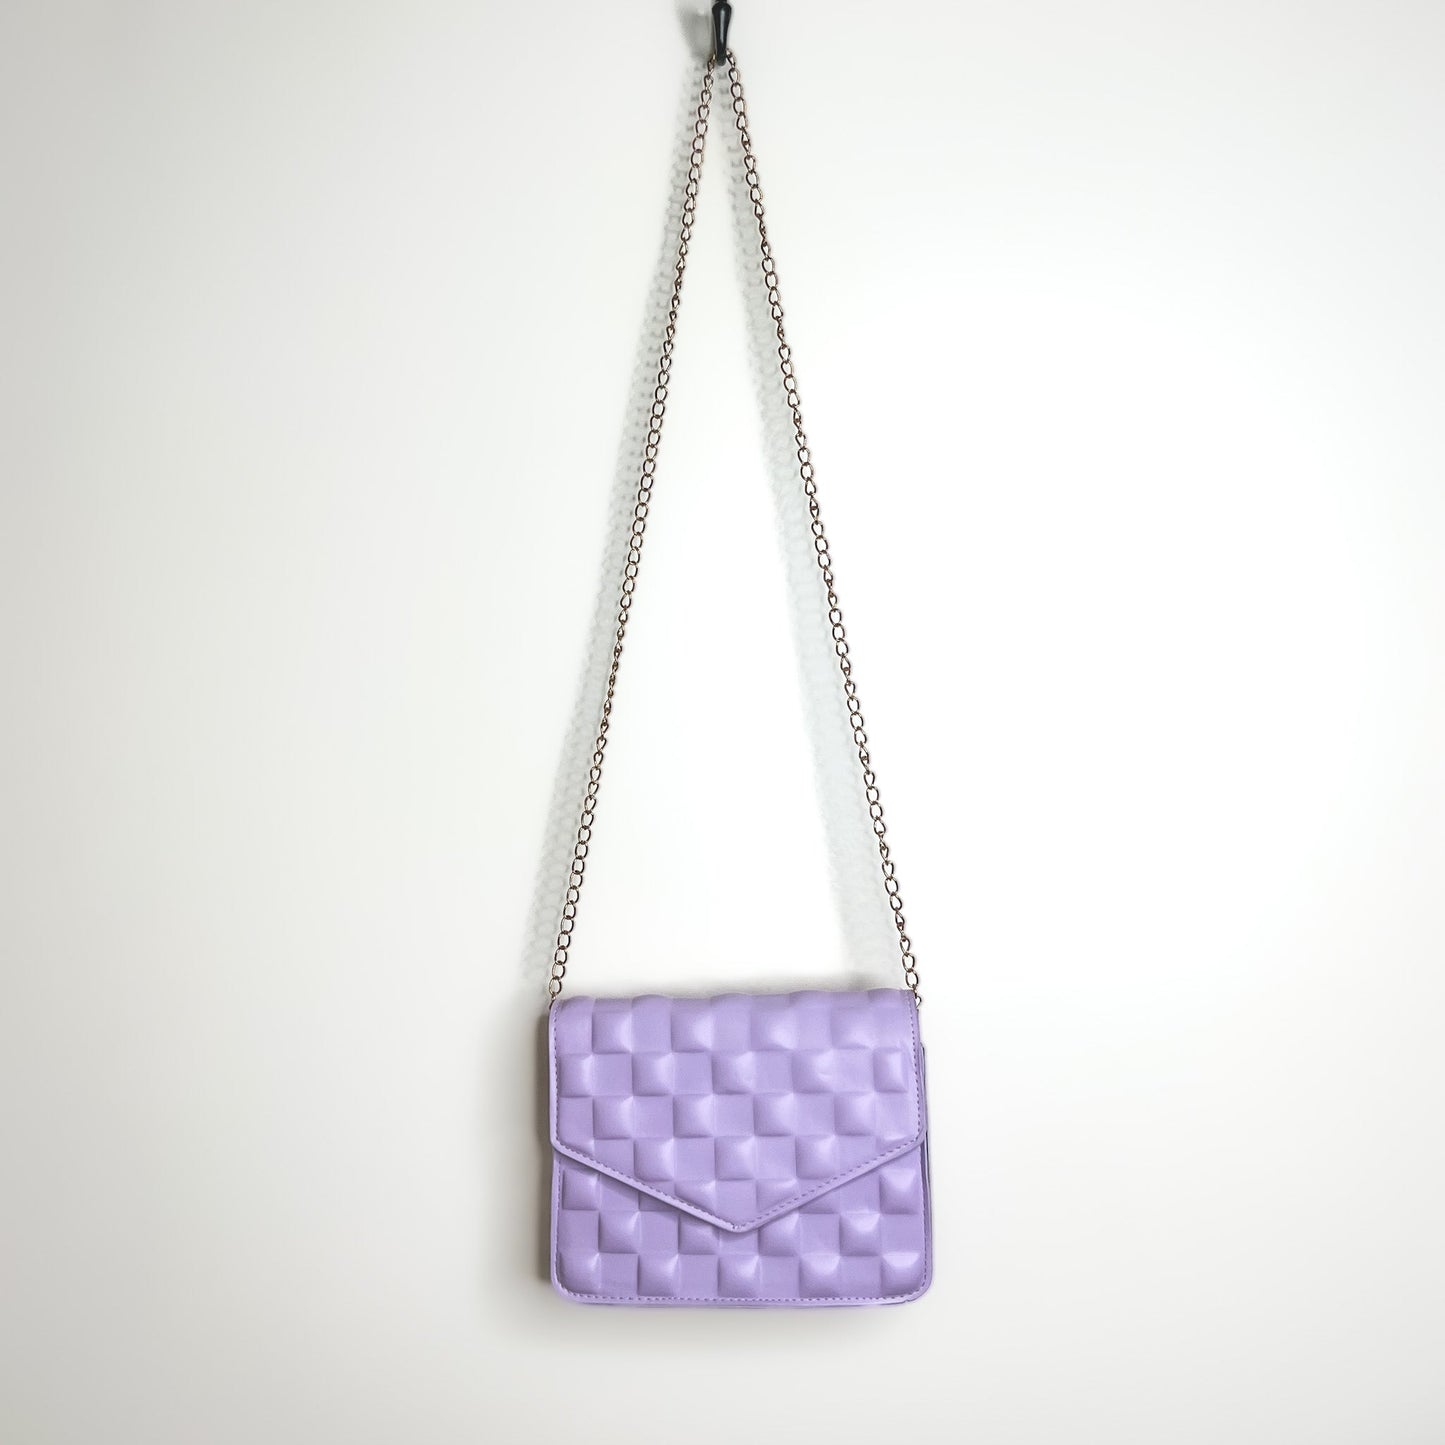 Playful Popsicle Sling Bag - The Accessorys Official